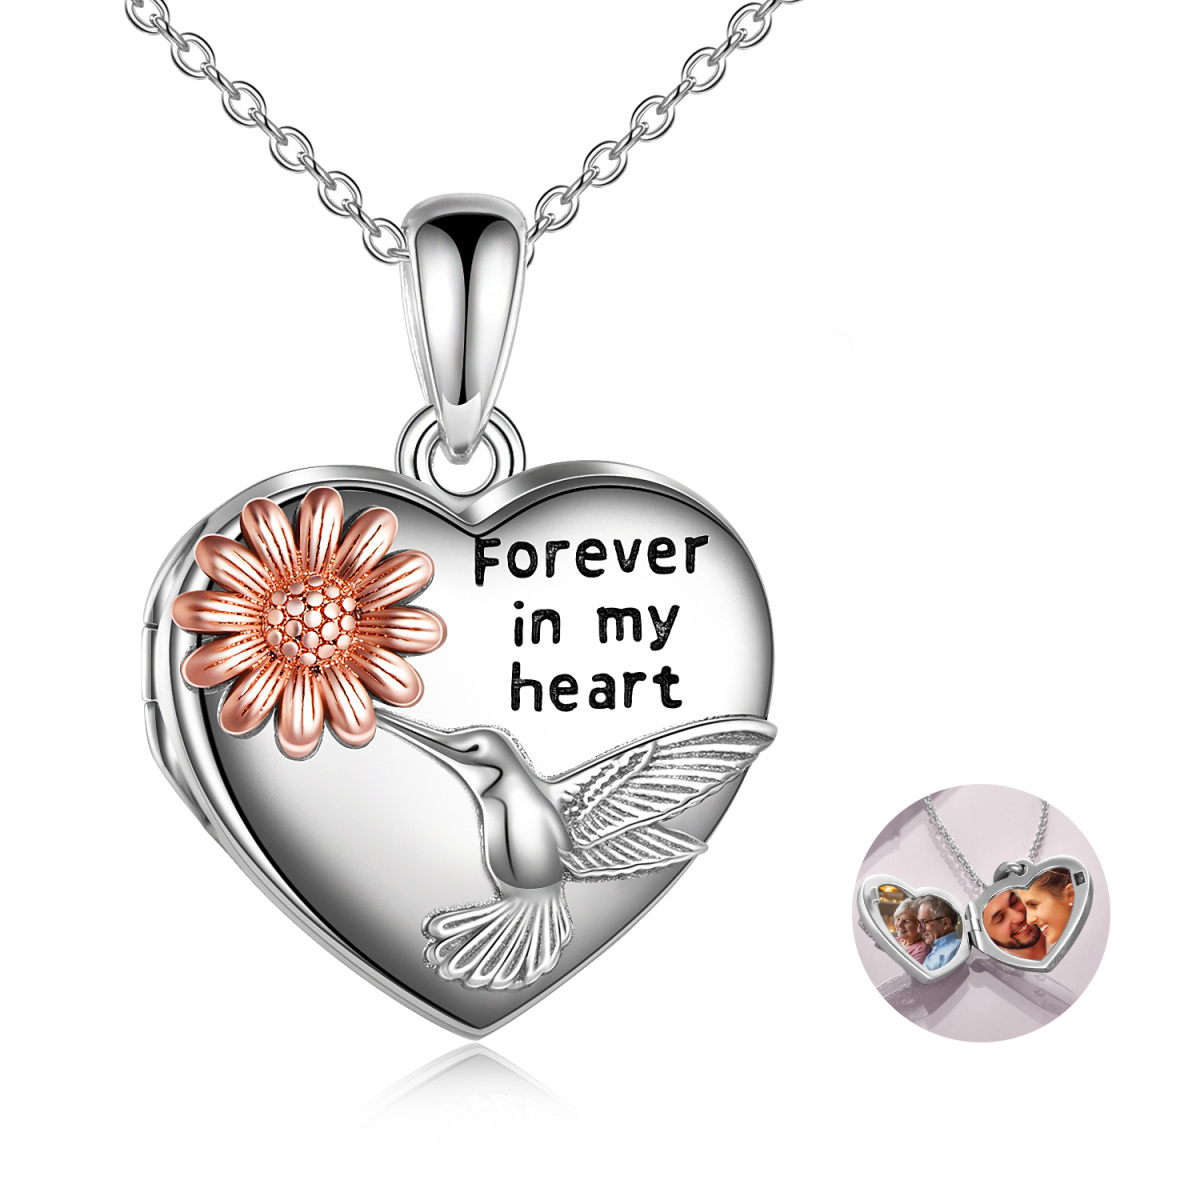 Sterling Silver Hummingbird & Sunflower Personalized Photo Locket Necklace with Engraved Word-1